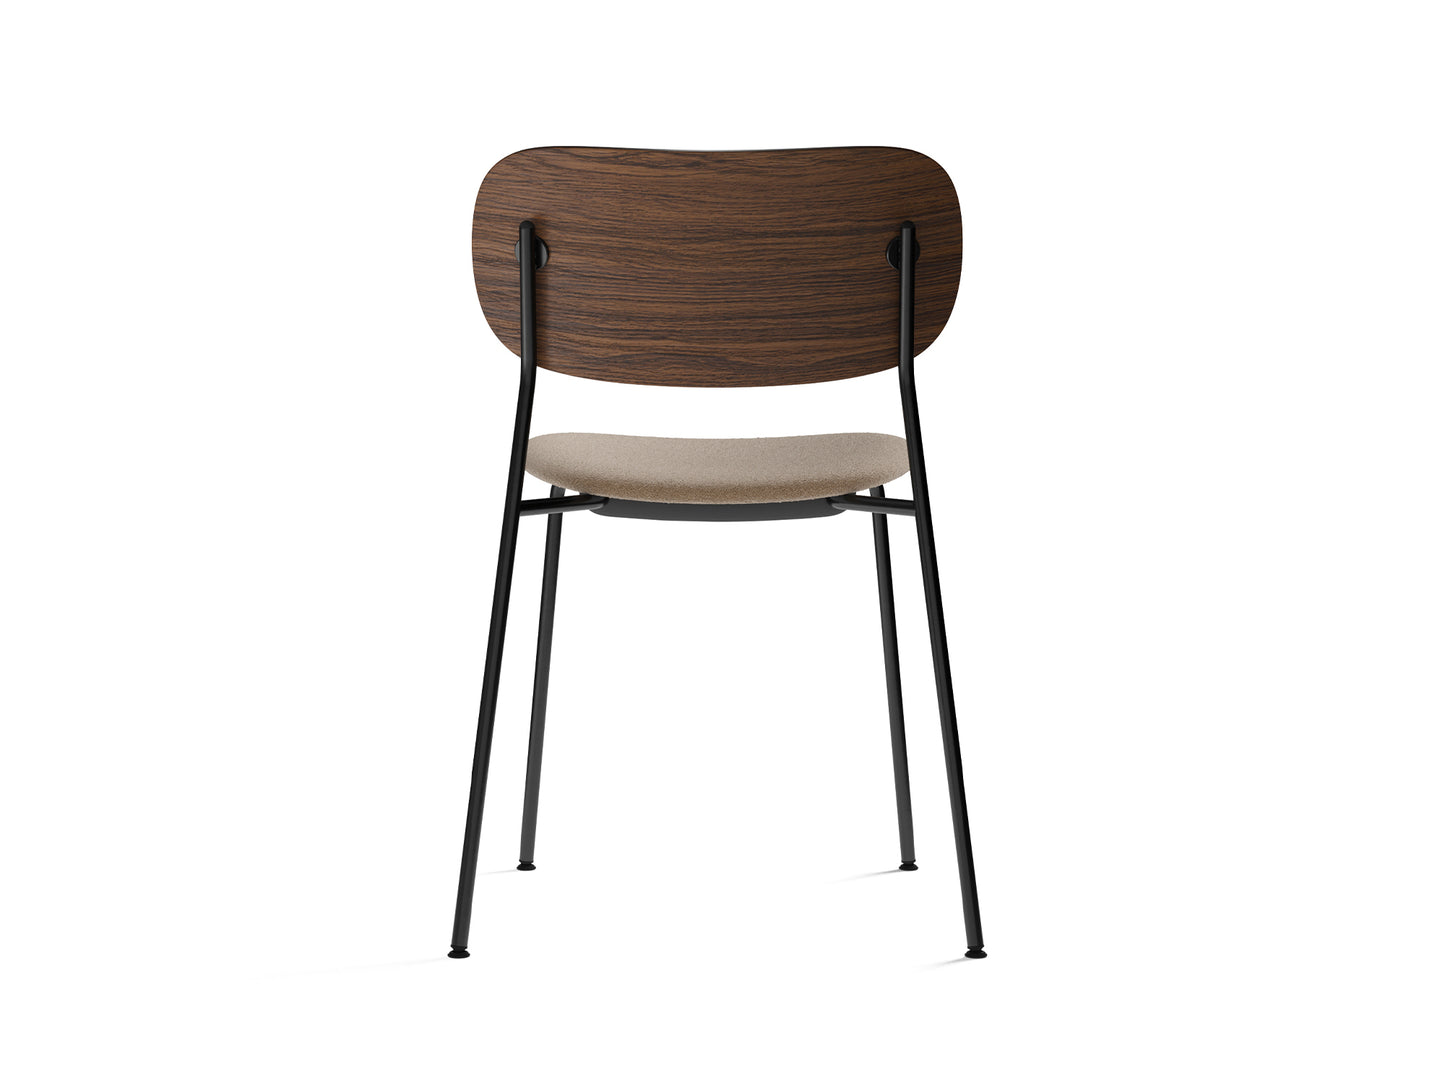 Co Dining Chair Upholstered by Menu - Without Armrest / Black Powder Coated Steel / Dark Oak / Lupo 004